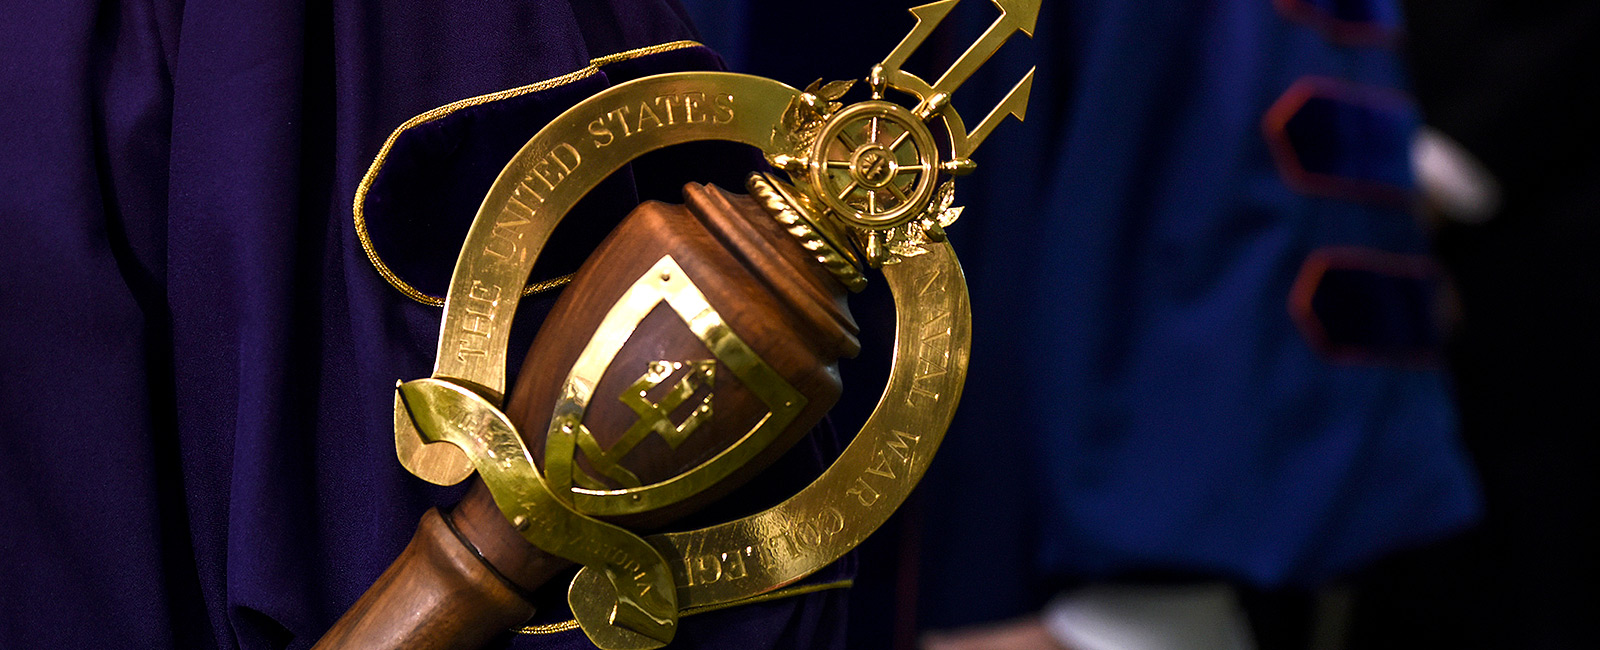 The Mace is a symbol of U.S. Naval War College as an academic institution.